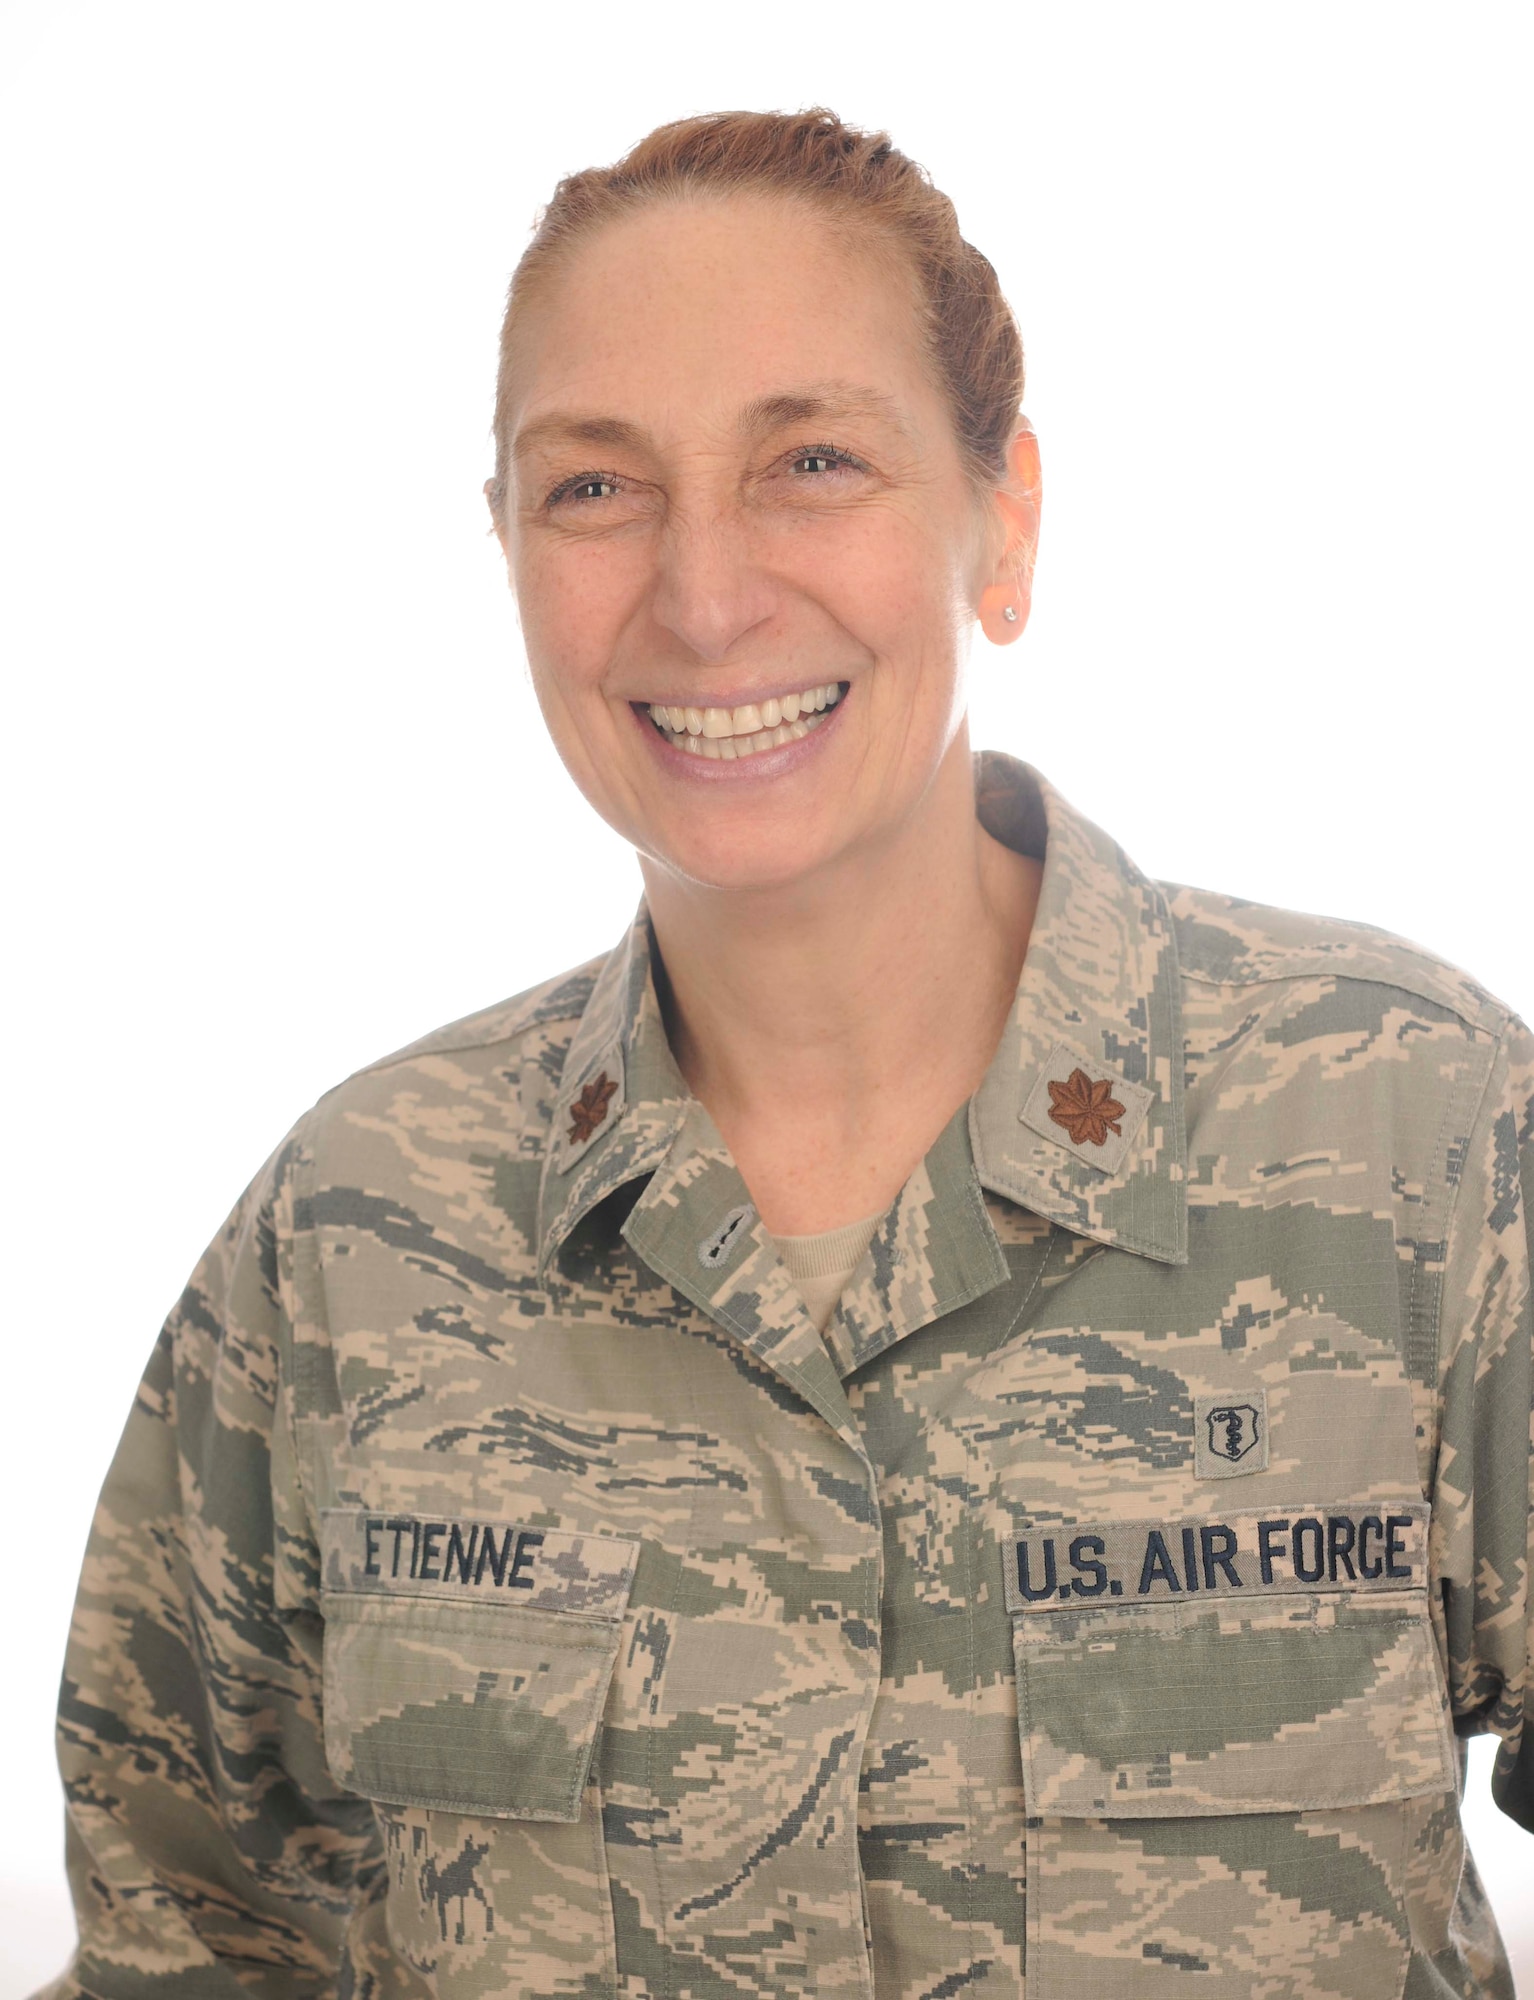 Maj. Neysa Etienne, 86th Medical Squadron flight commander and primary Survival, Evasion, Resistance, and Escape psychologist for U.S. Air Forces Europe and United States European Command, poses for a photo on Ramstein Air Base, Germany, Jan. 5, 2018. Etienne recently received the Department of Defense-wide Allied Health Leadership Excellence Award for senior clinician of the year, based on her work repatriating isolation victims. (U.S. Air Force photo by Senior Airman Elizabeth Baker)